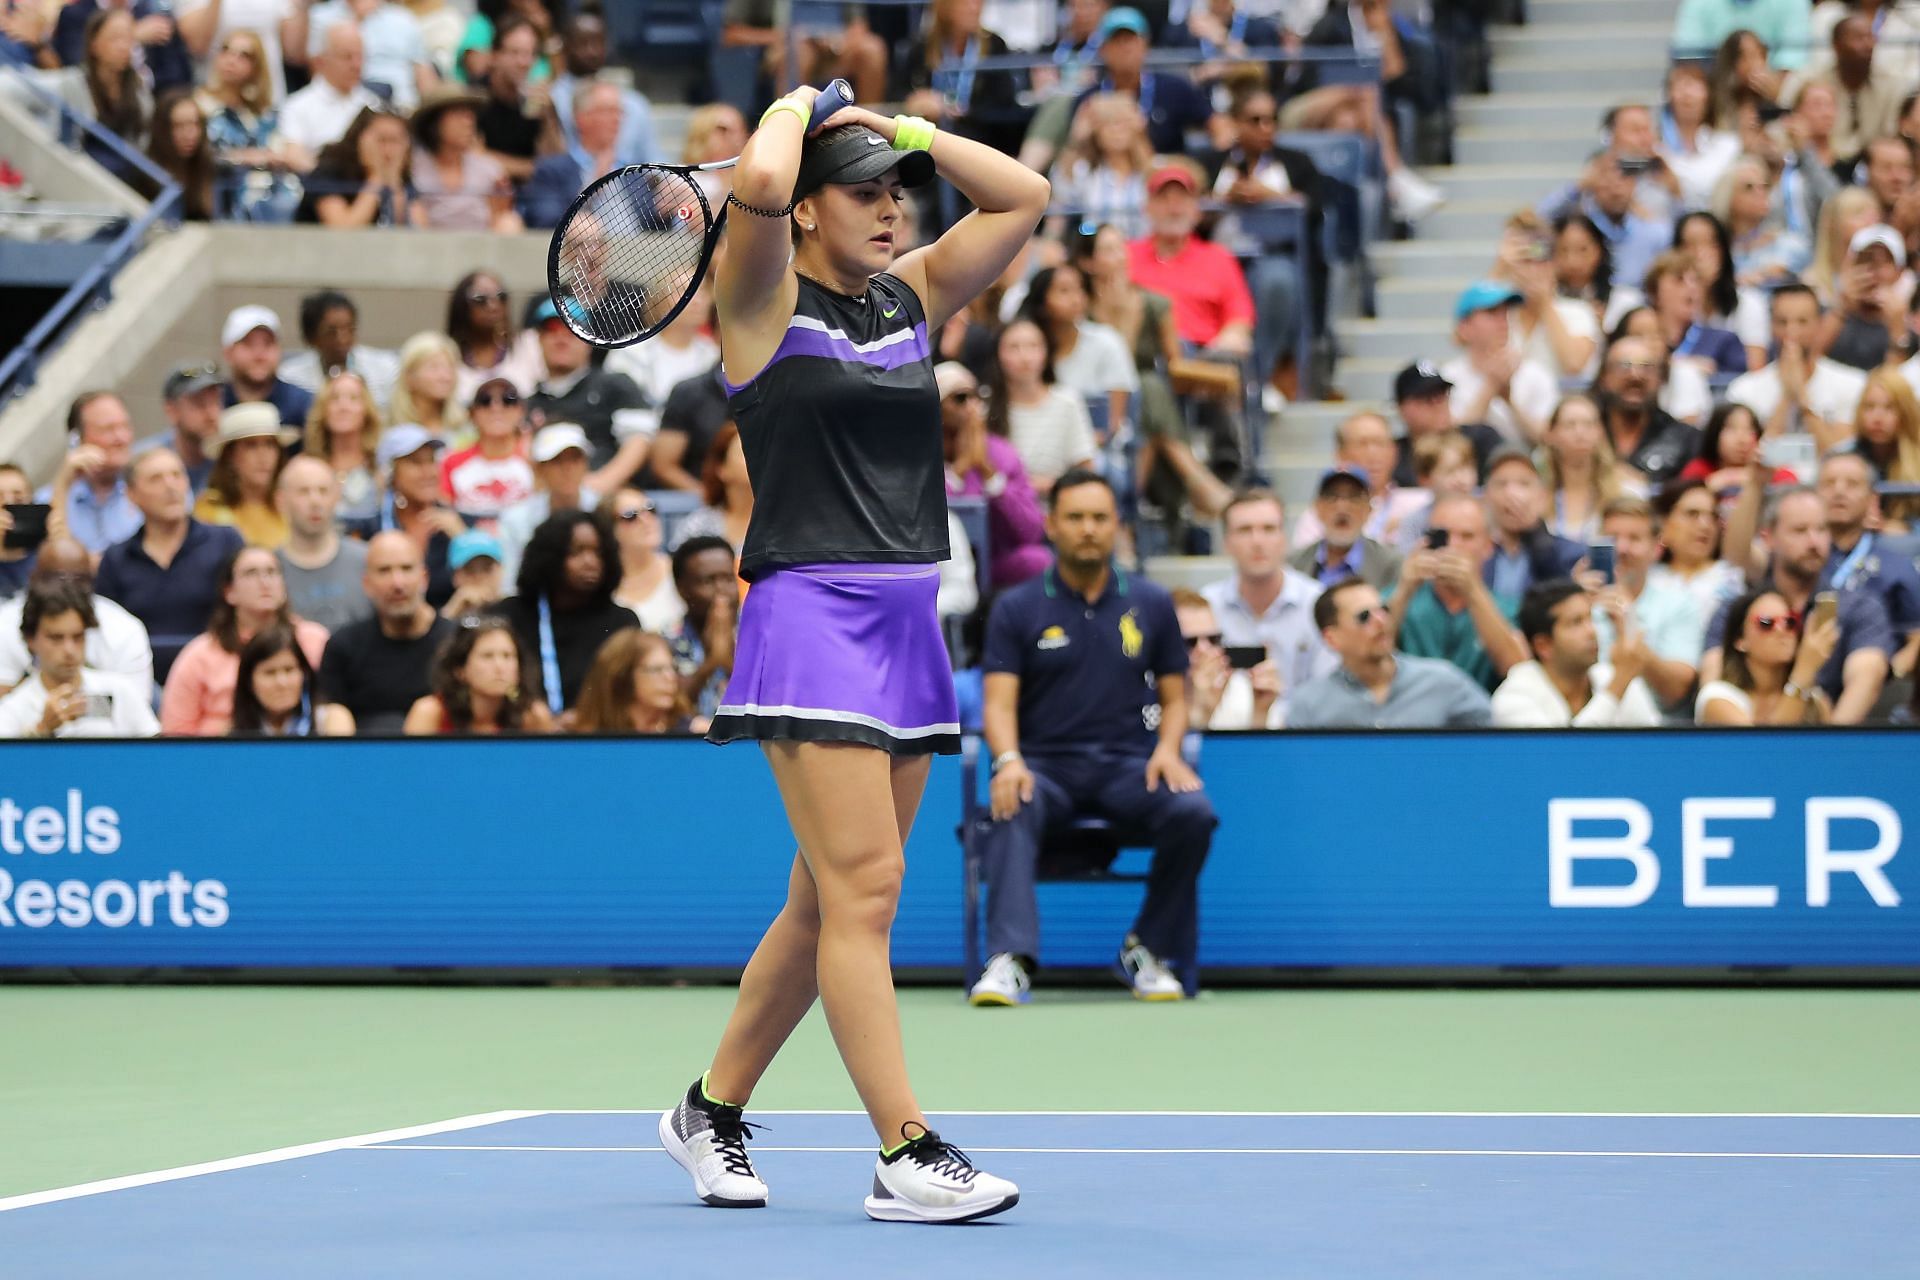 Bianca Andreescu at the 2019 US Open finals  ﻿ ﻿ ﻿